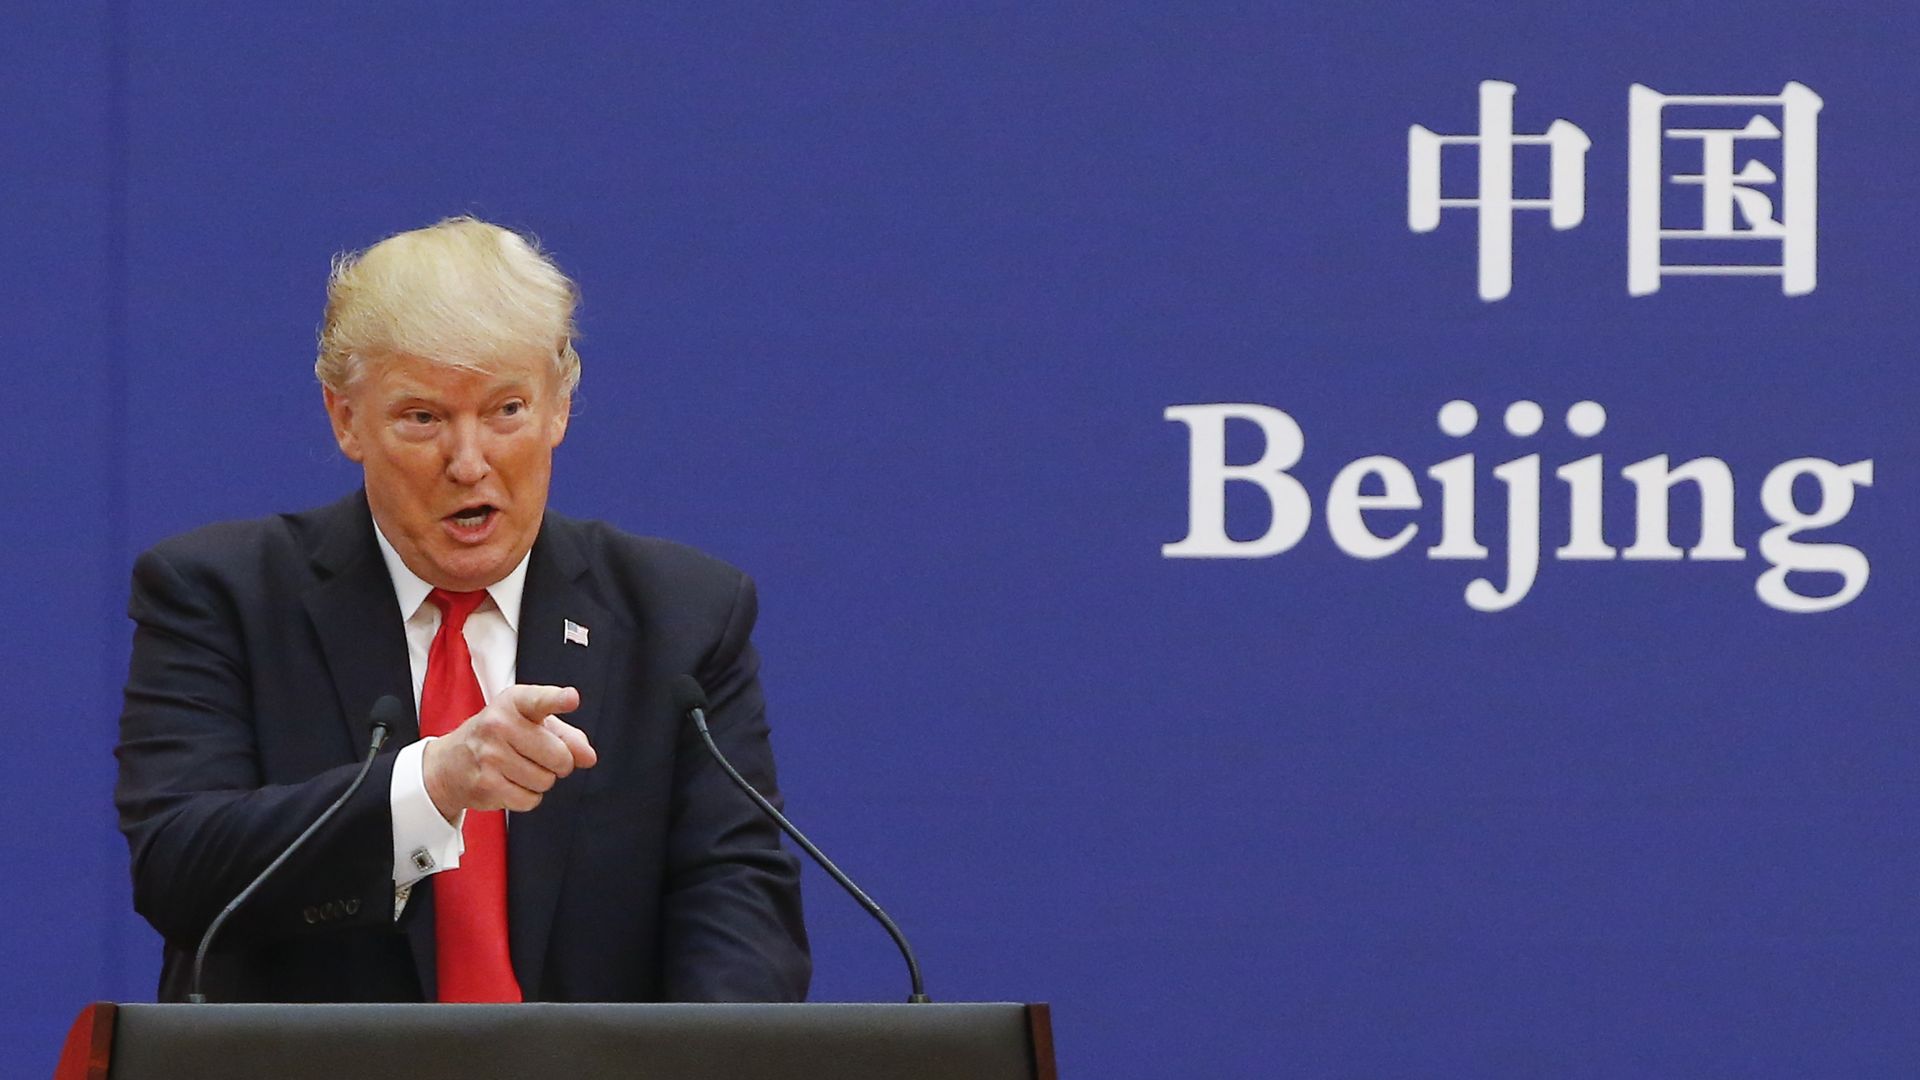 Trump speaks at a podium in Chine in front of a screen that says "Beijing"